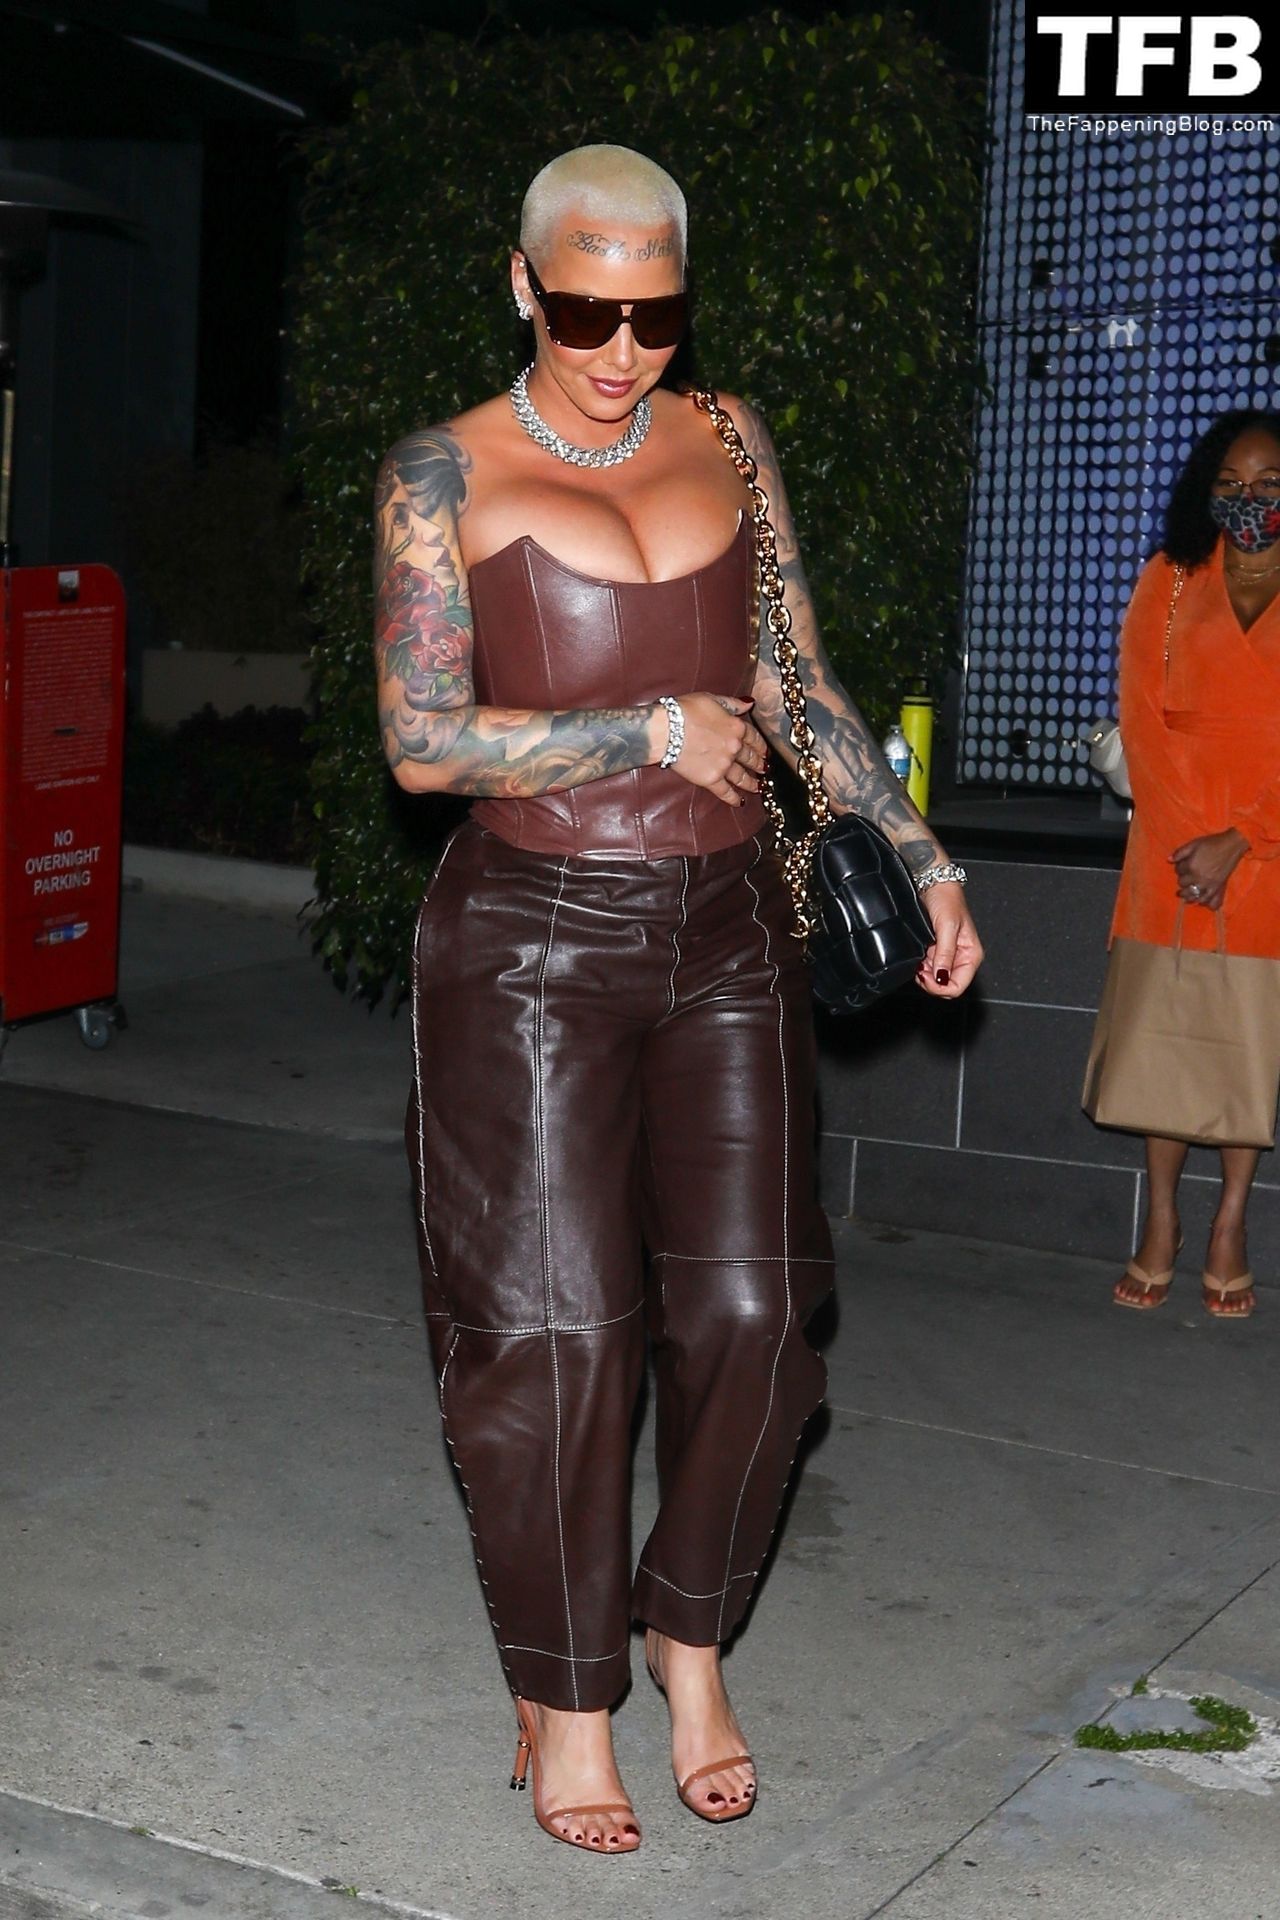 Amber-Rose-Sexy-The-Fappening-Blog-21.jpg